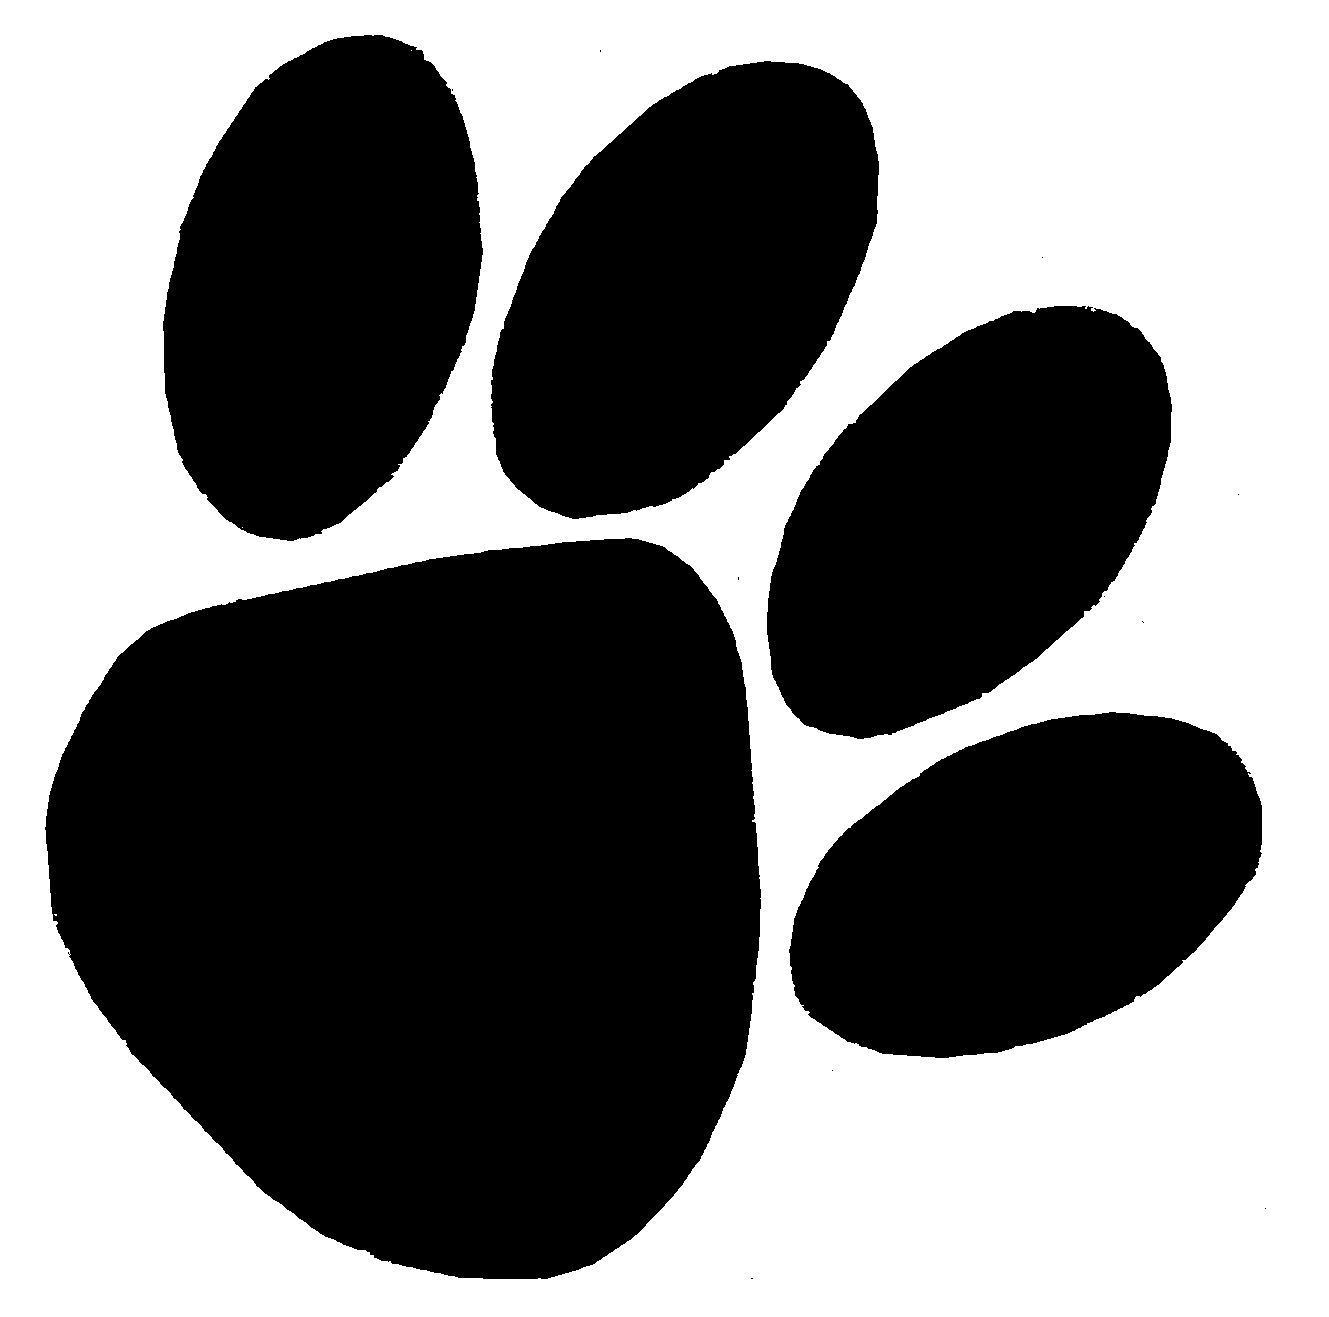 paws clipart black and white